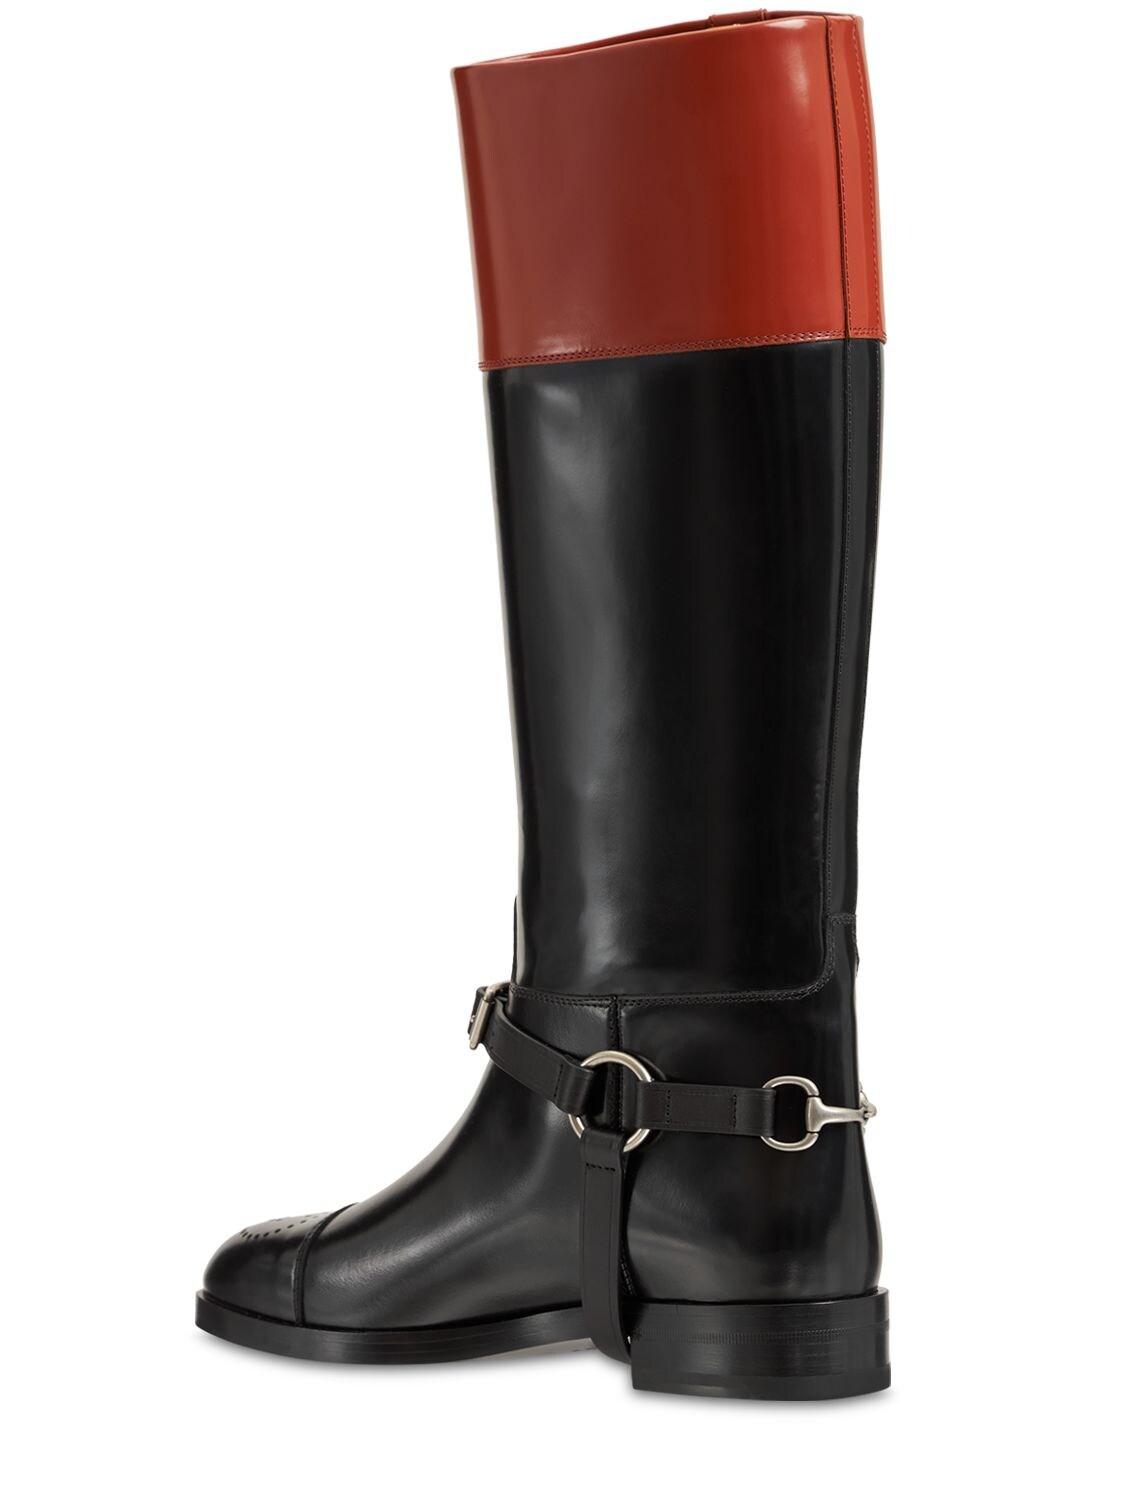 Gucci 20mm Zelda Tall Leather Boots in Black/Brown (Black) | Lyst